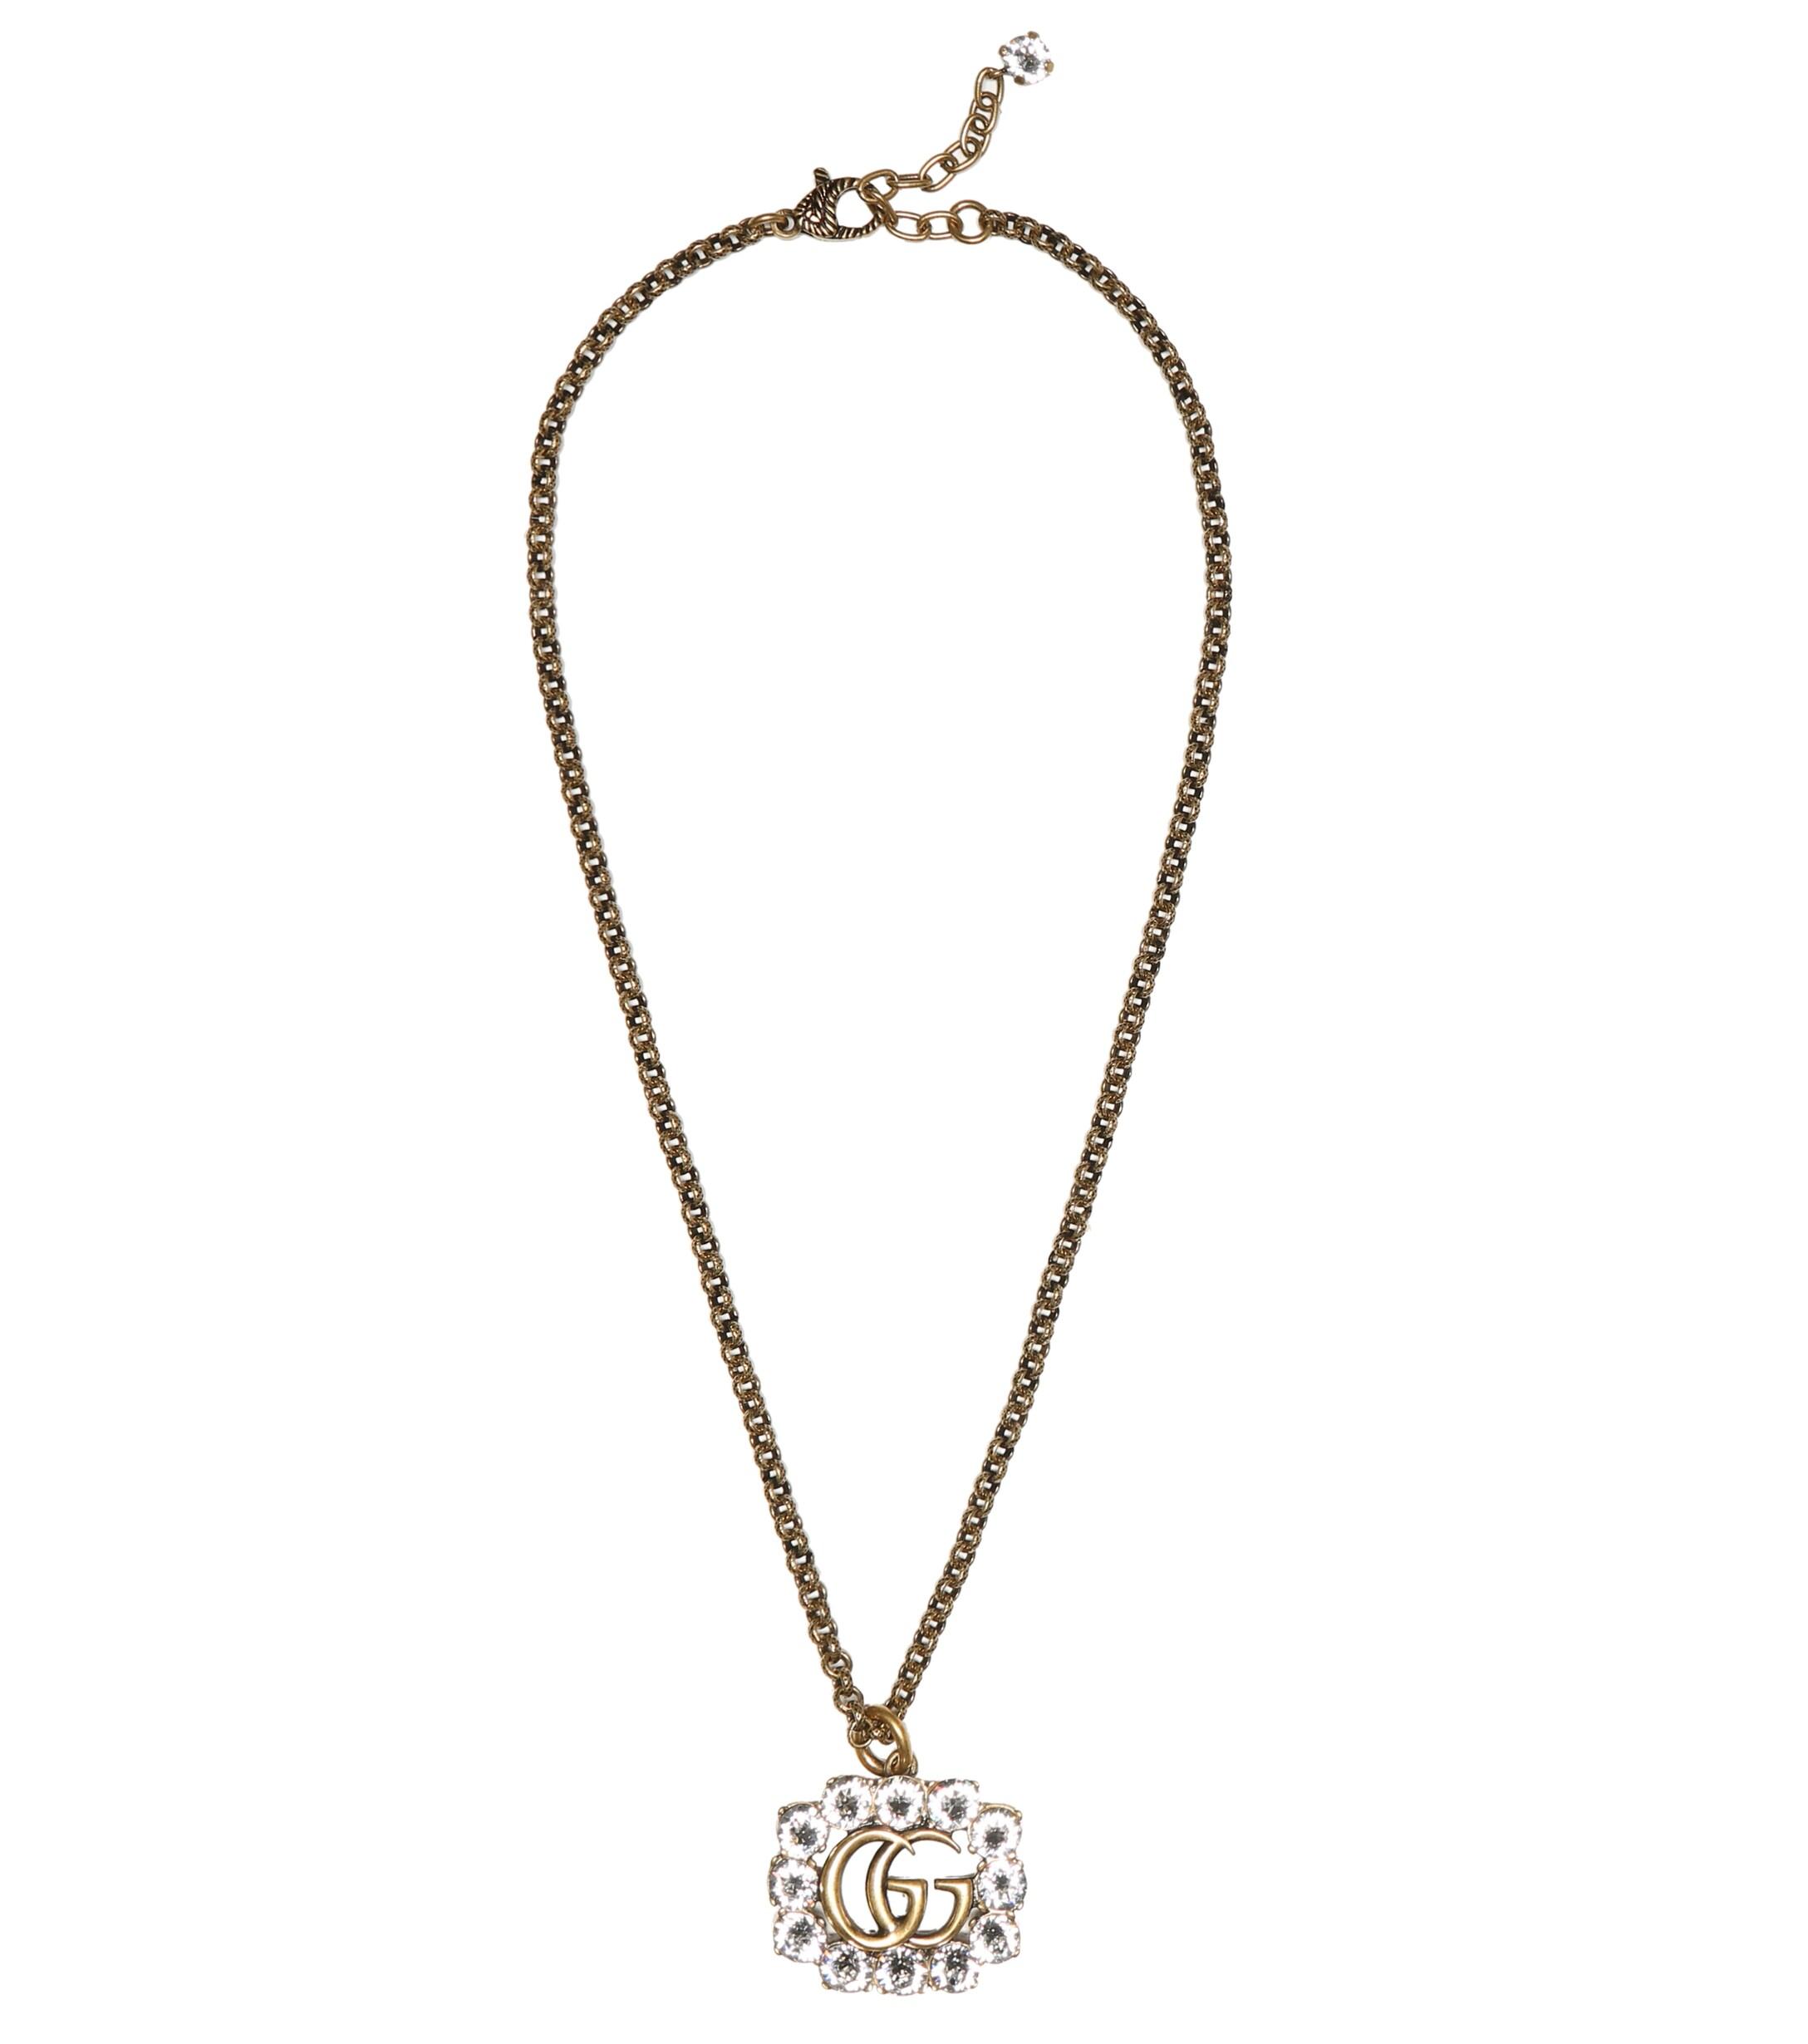 Gucci Gg Marmont Crystal Necklace in Metallic | Lyst